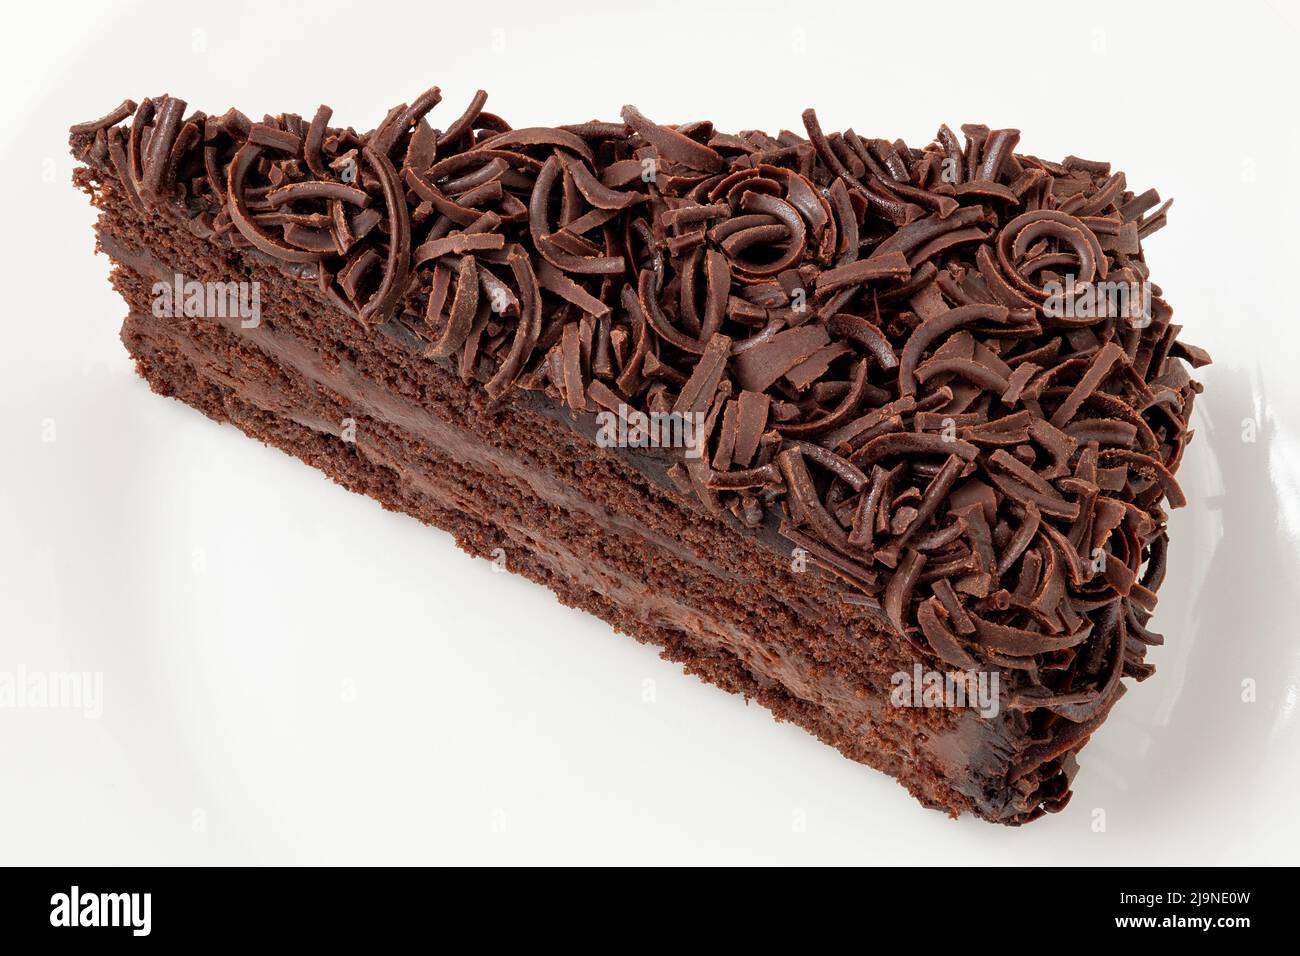 Slice of chocolate cake with cream filling and chocolate shavings isolated on white plate. Top view. Stock Photo